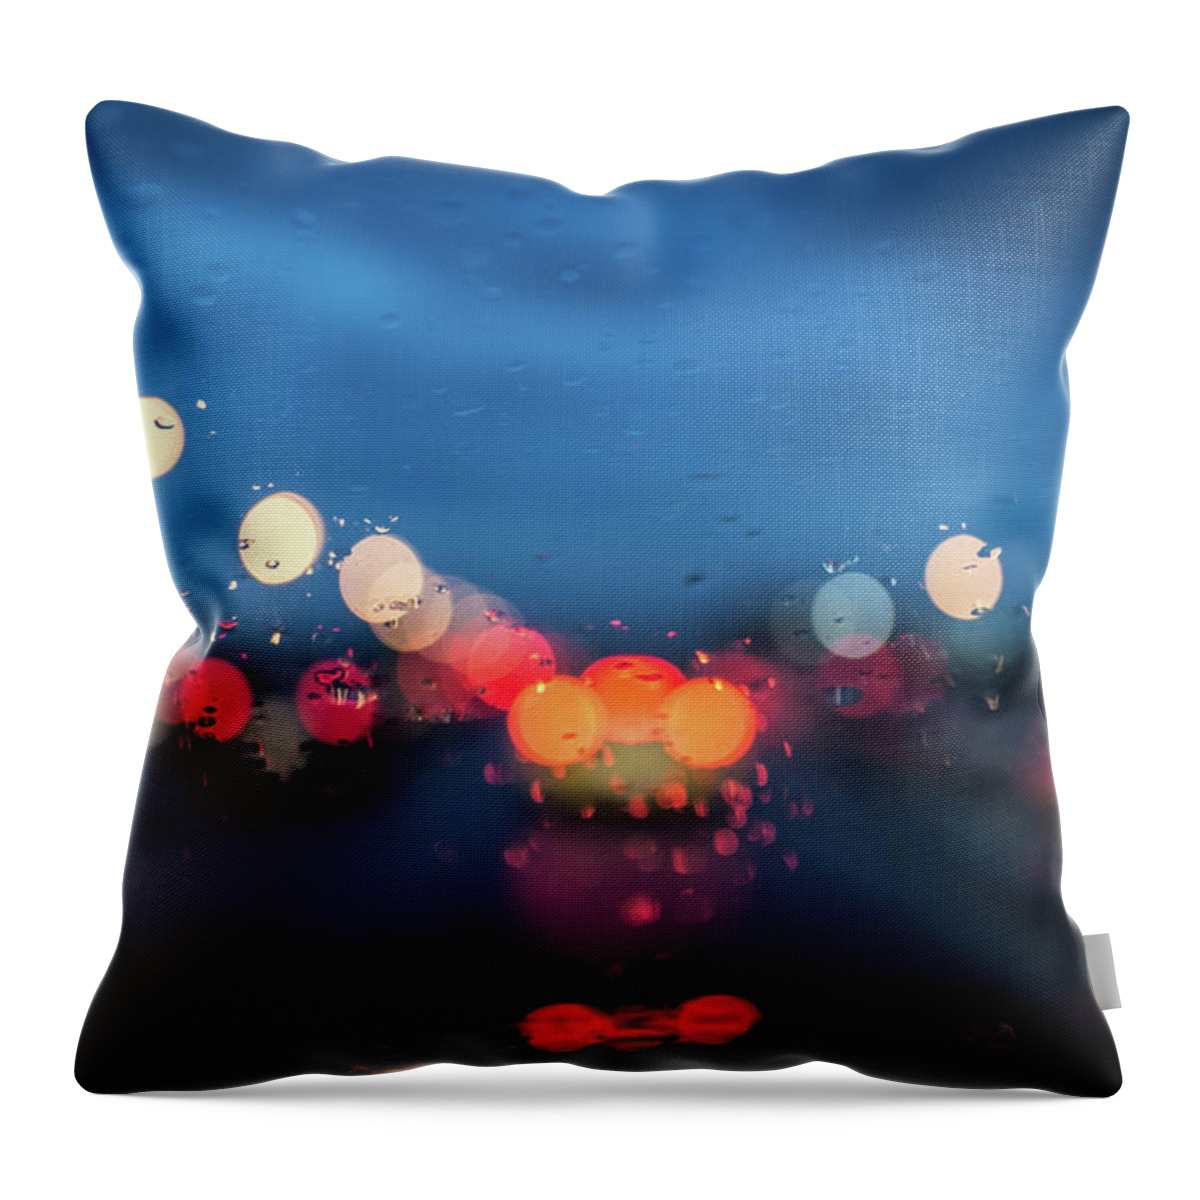 Transparent Throw Pillow featuring the photograph Taillight Bokeh by Emrold